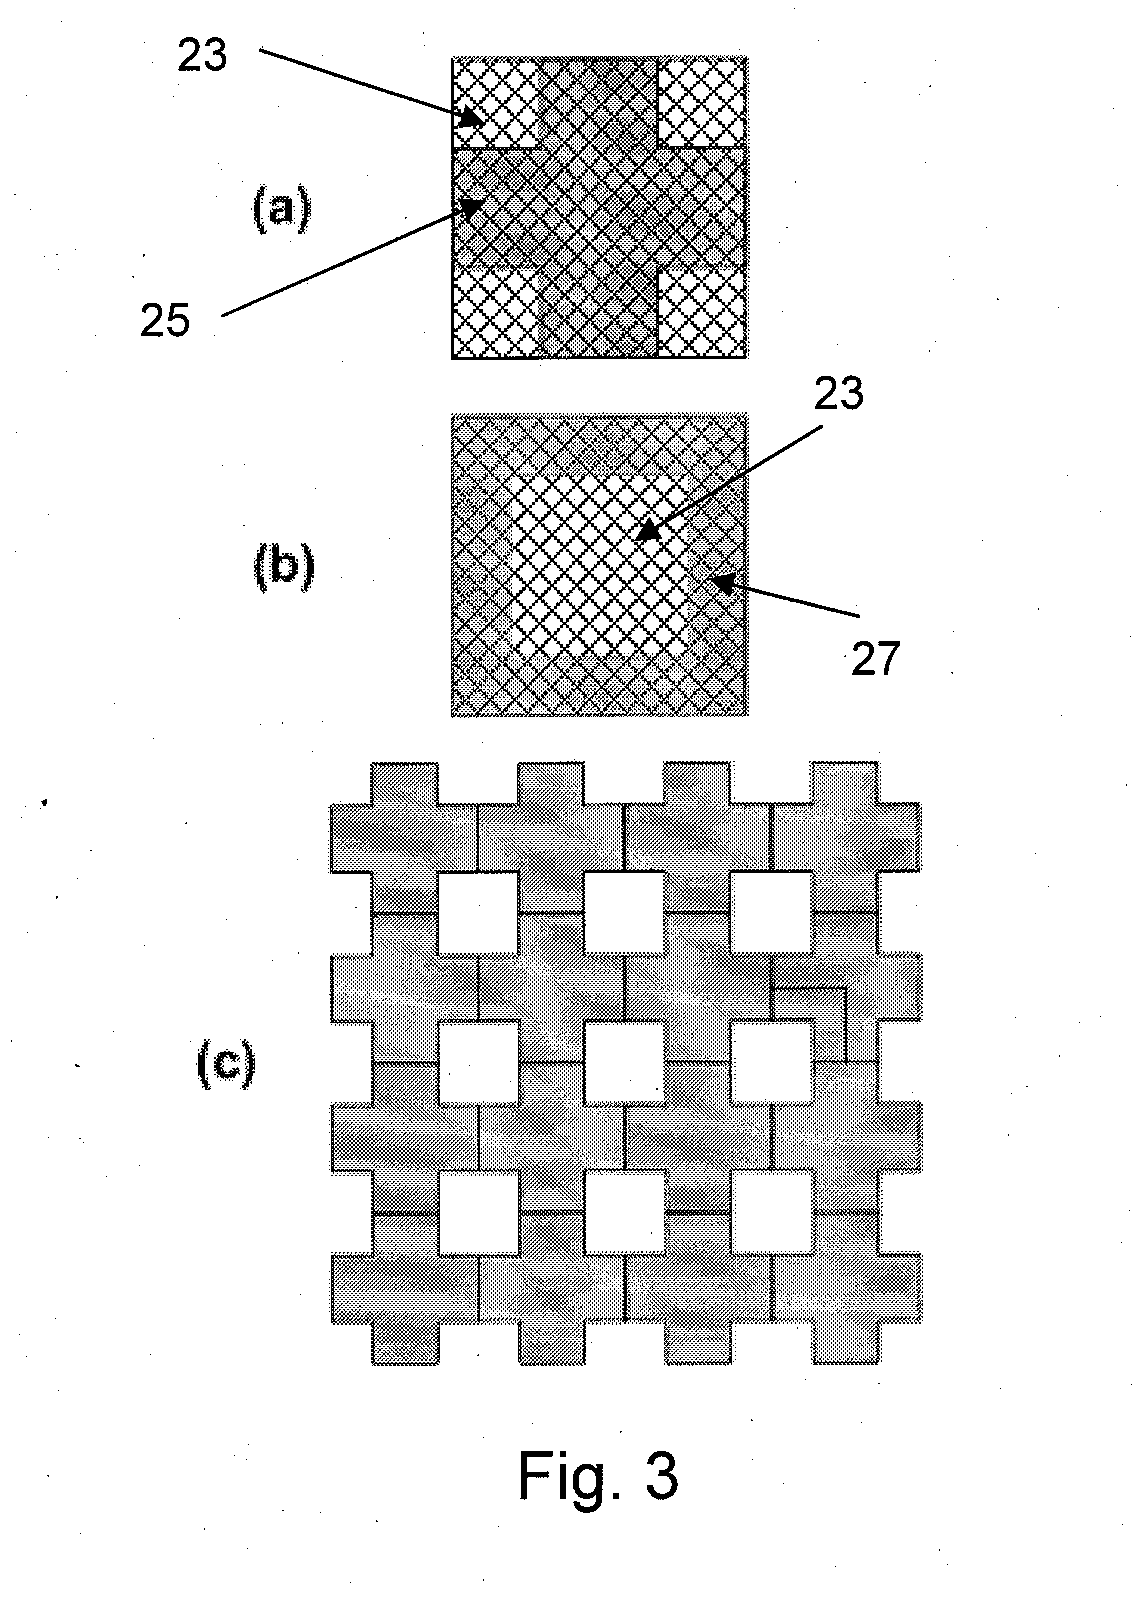 System and method for a single chip direct conversion transceiver in silicon